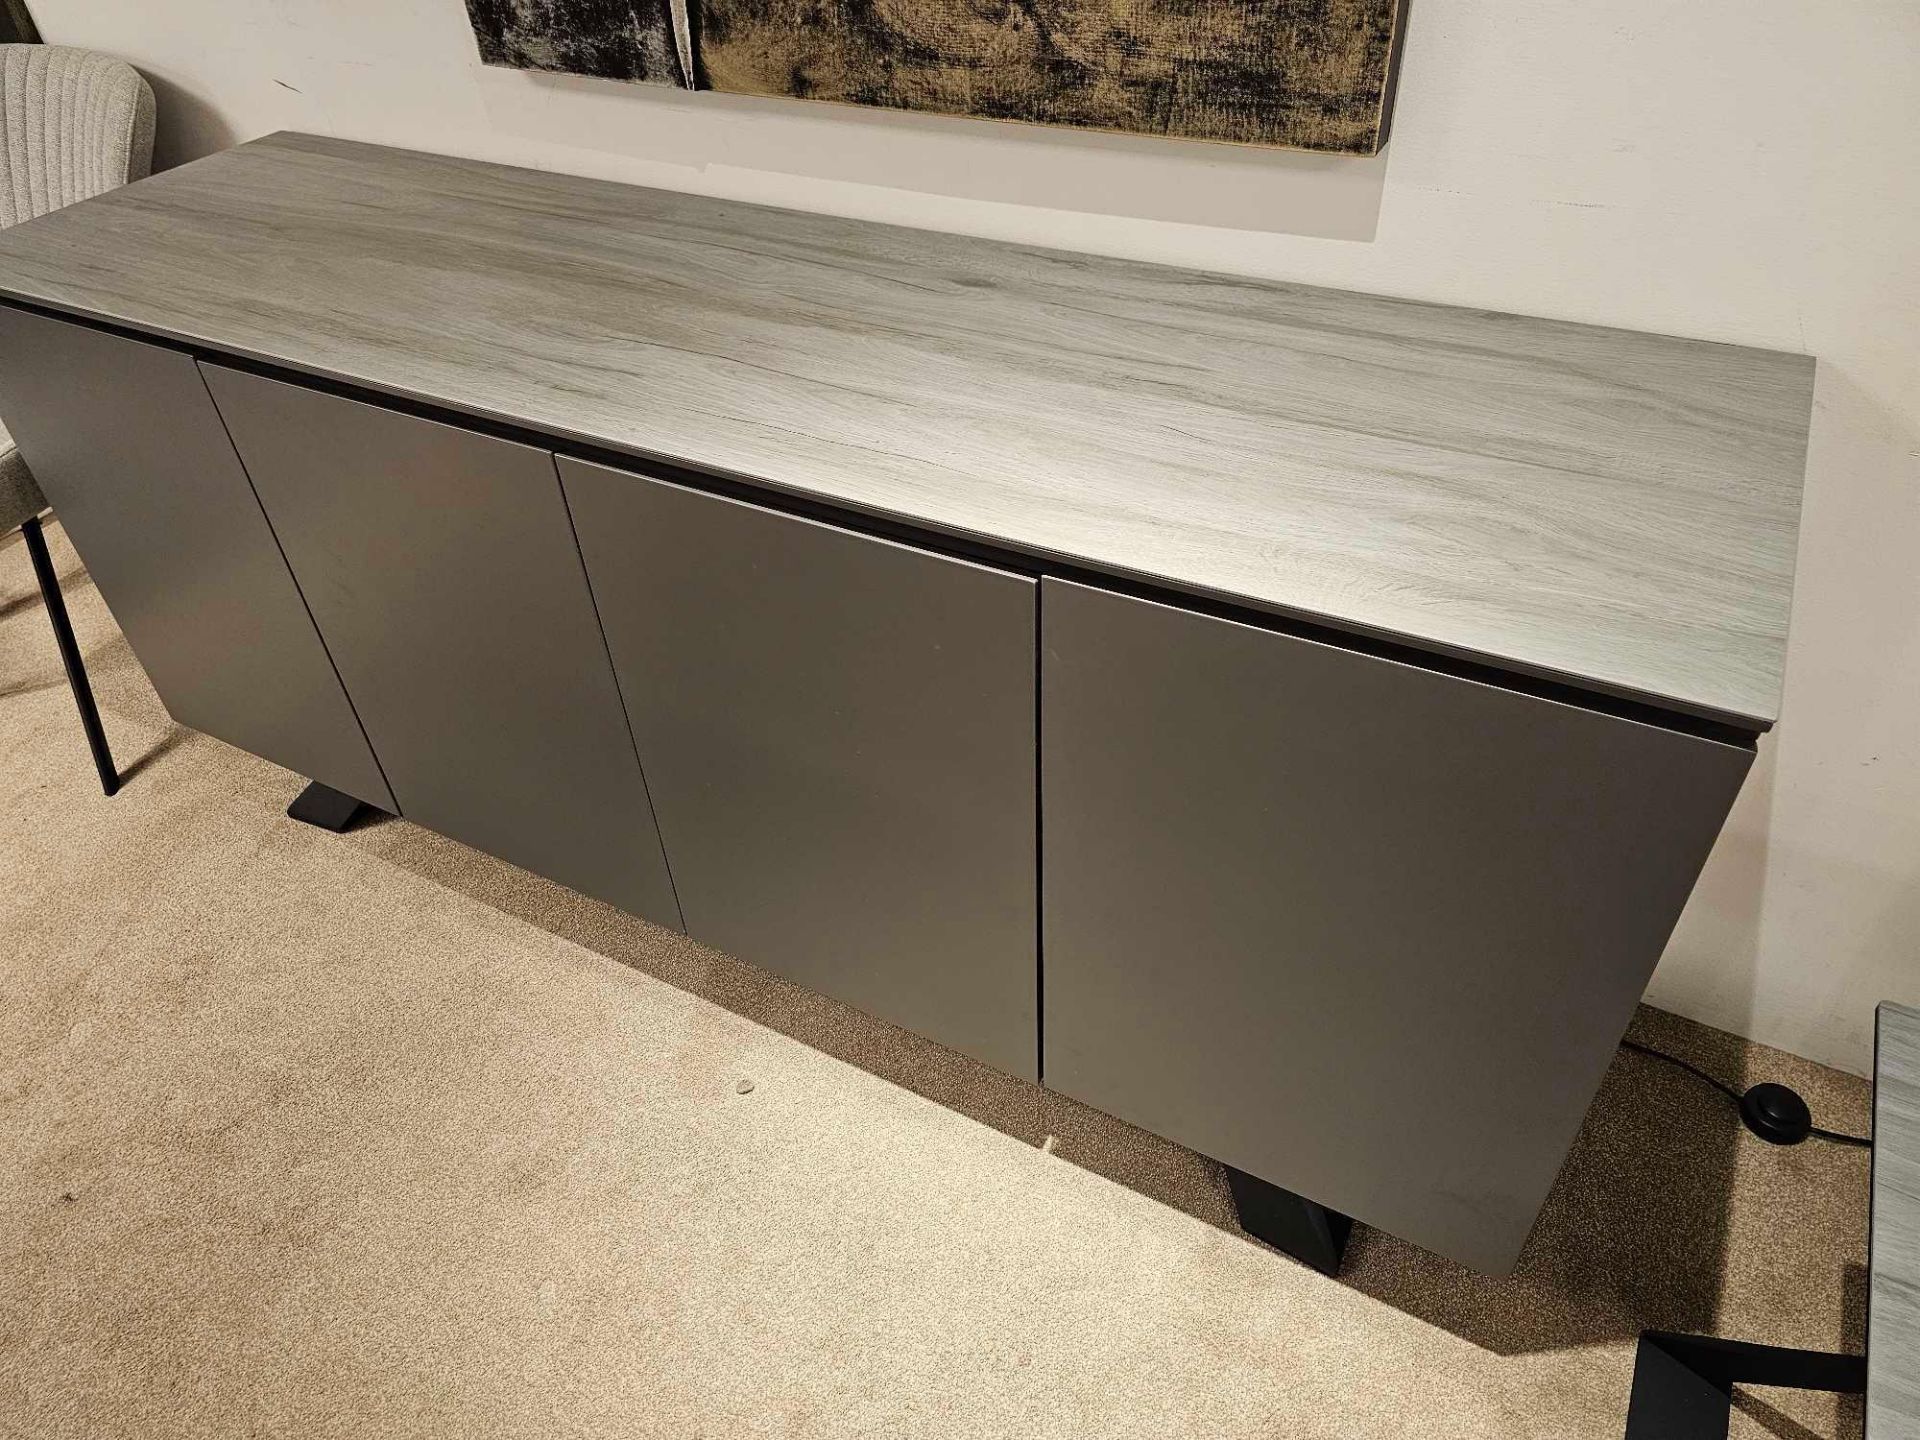 Spartan Sideboard by Kesterport The Spartan Four Door Sideboard provides is striking as a stand - Bild 4 aus 8